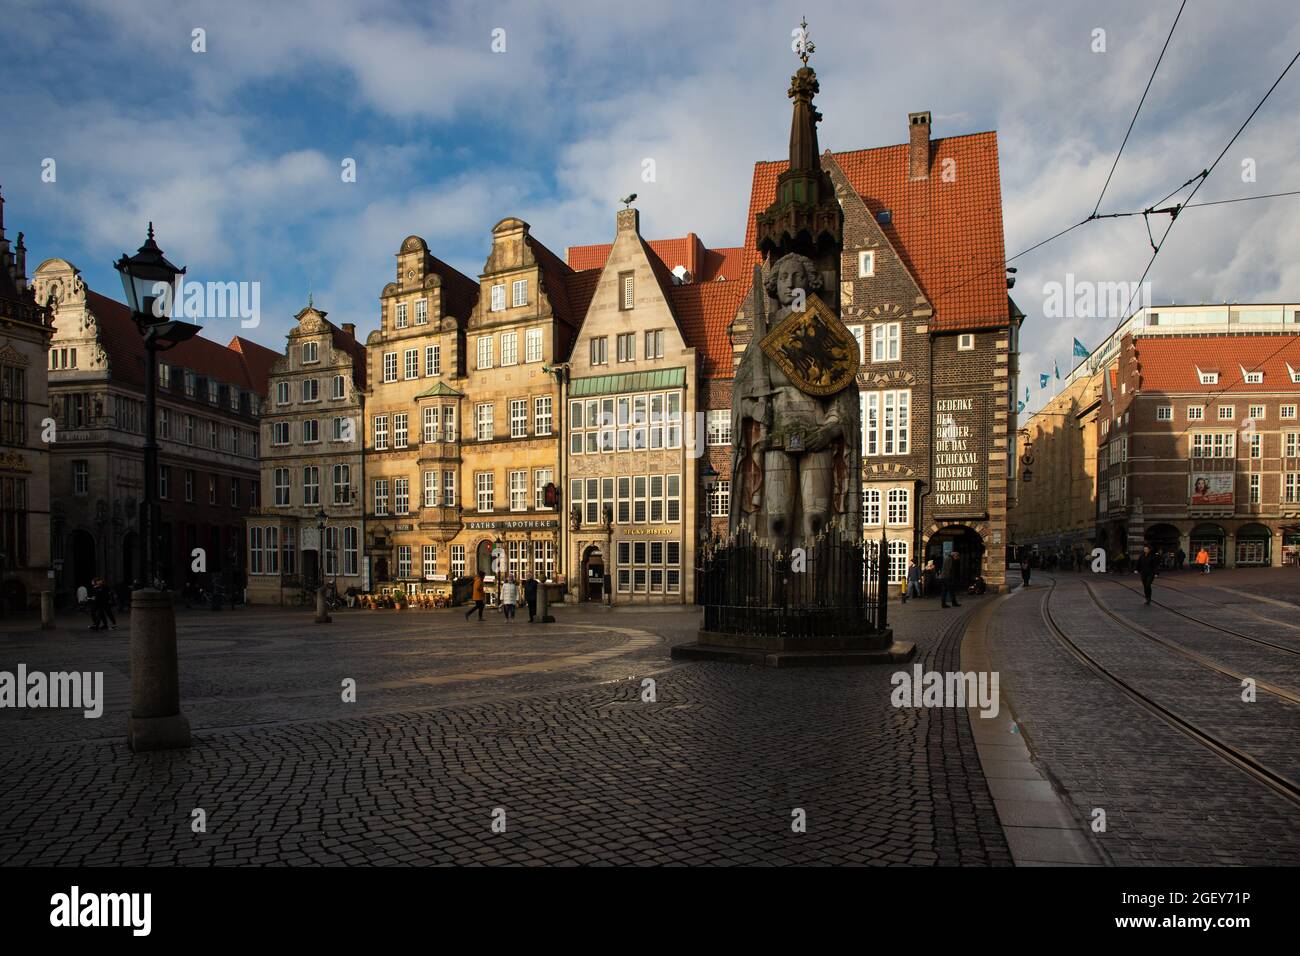 The market place of Bremen, Germany with the world cultural heritage site Roland statue and ancient houses in the background Stock Photo